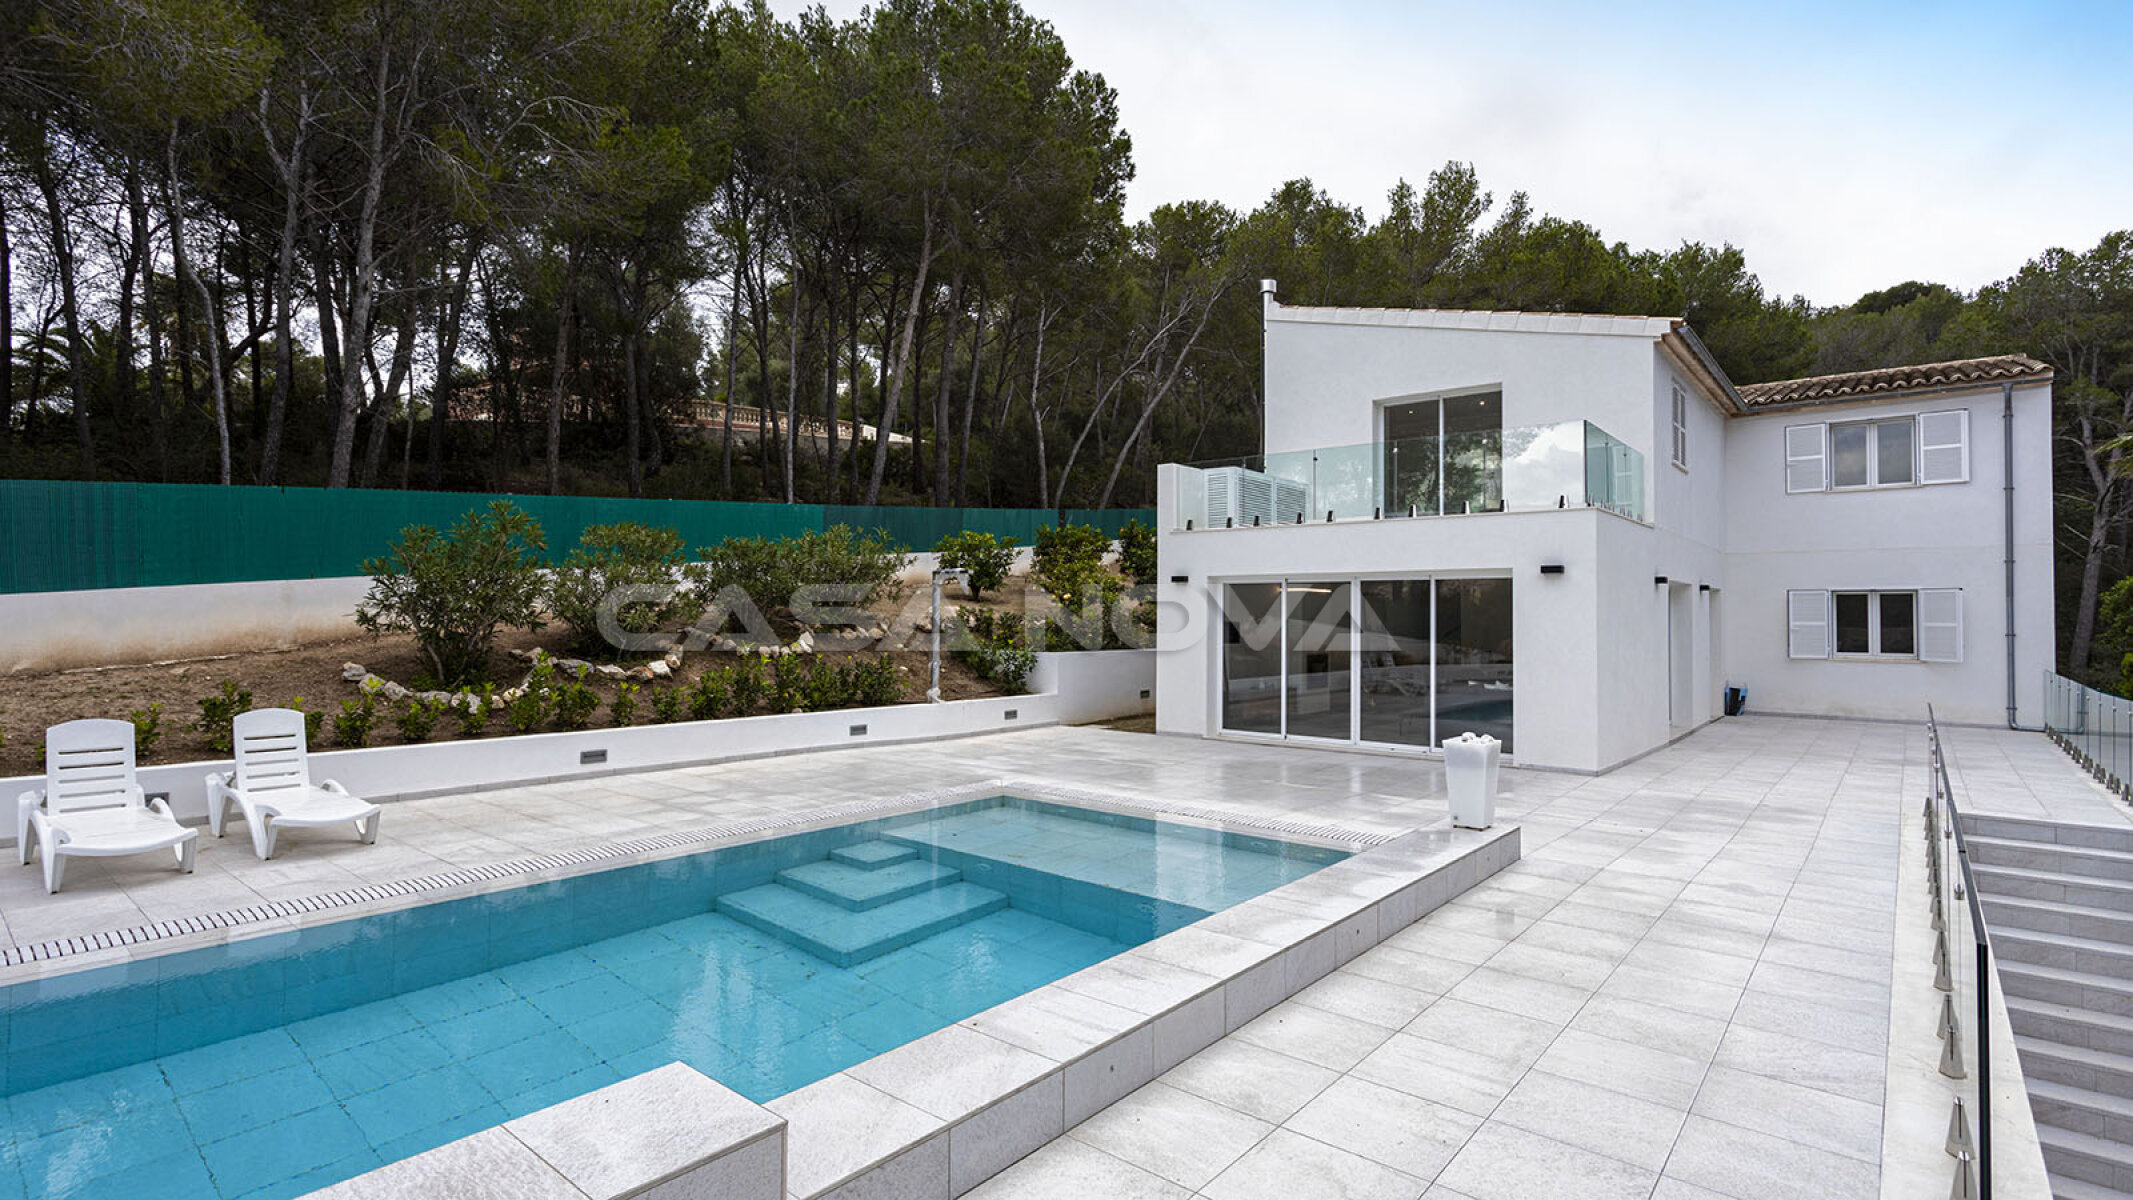 Bright villa with modern touches and privacy